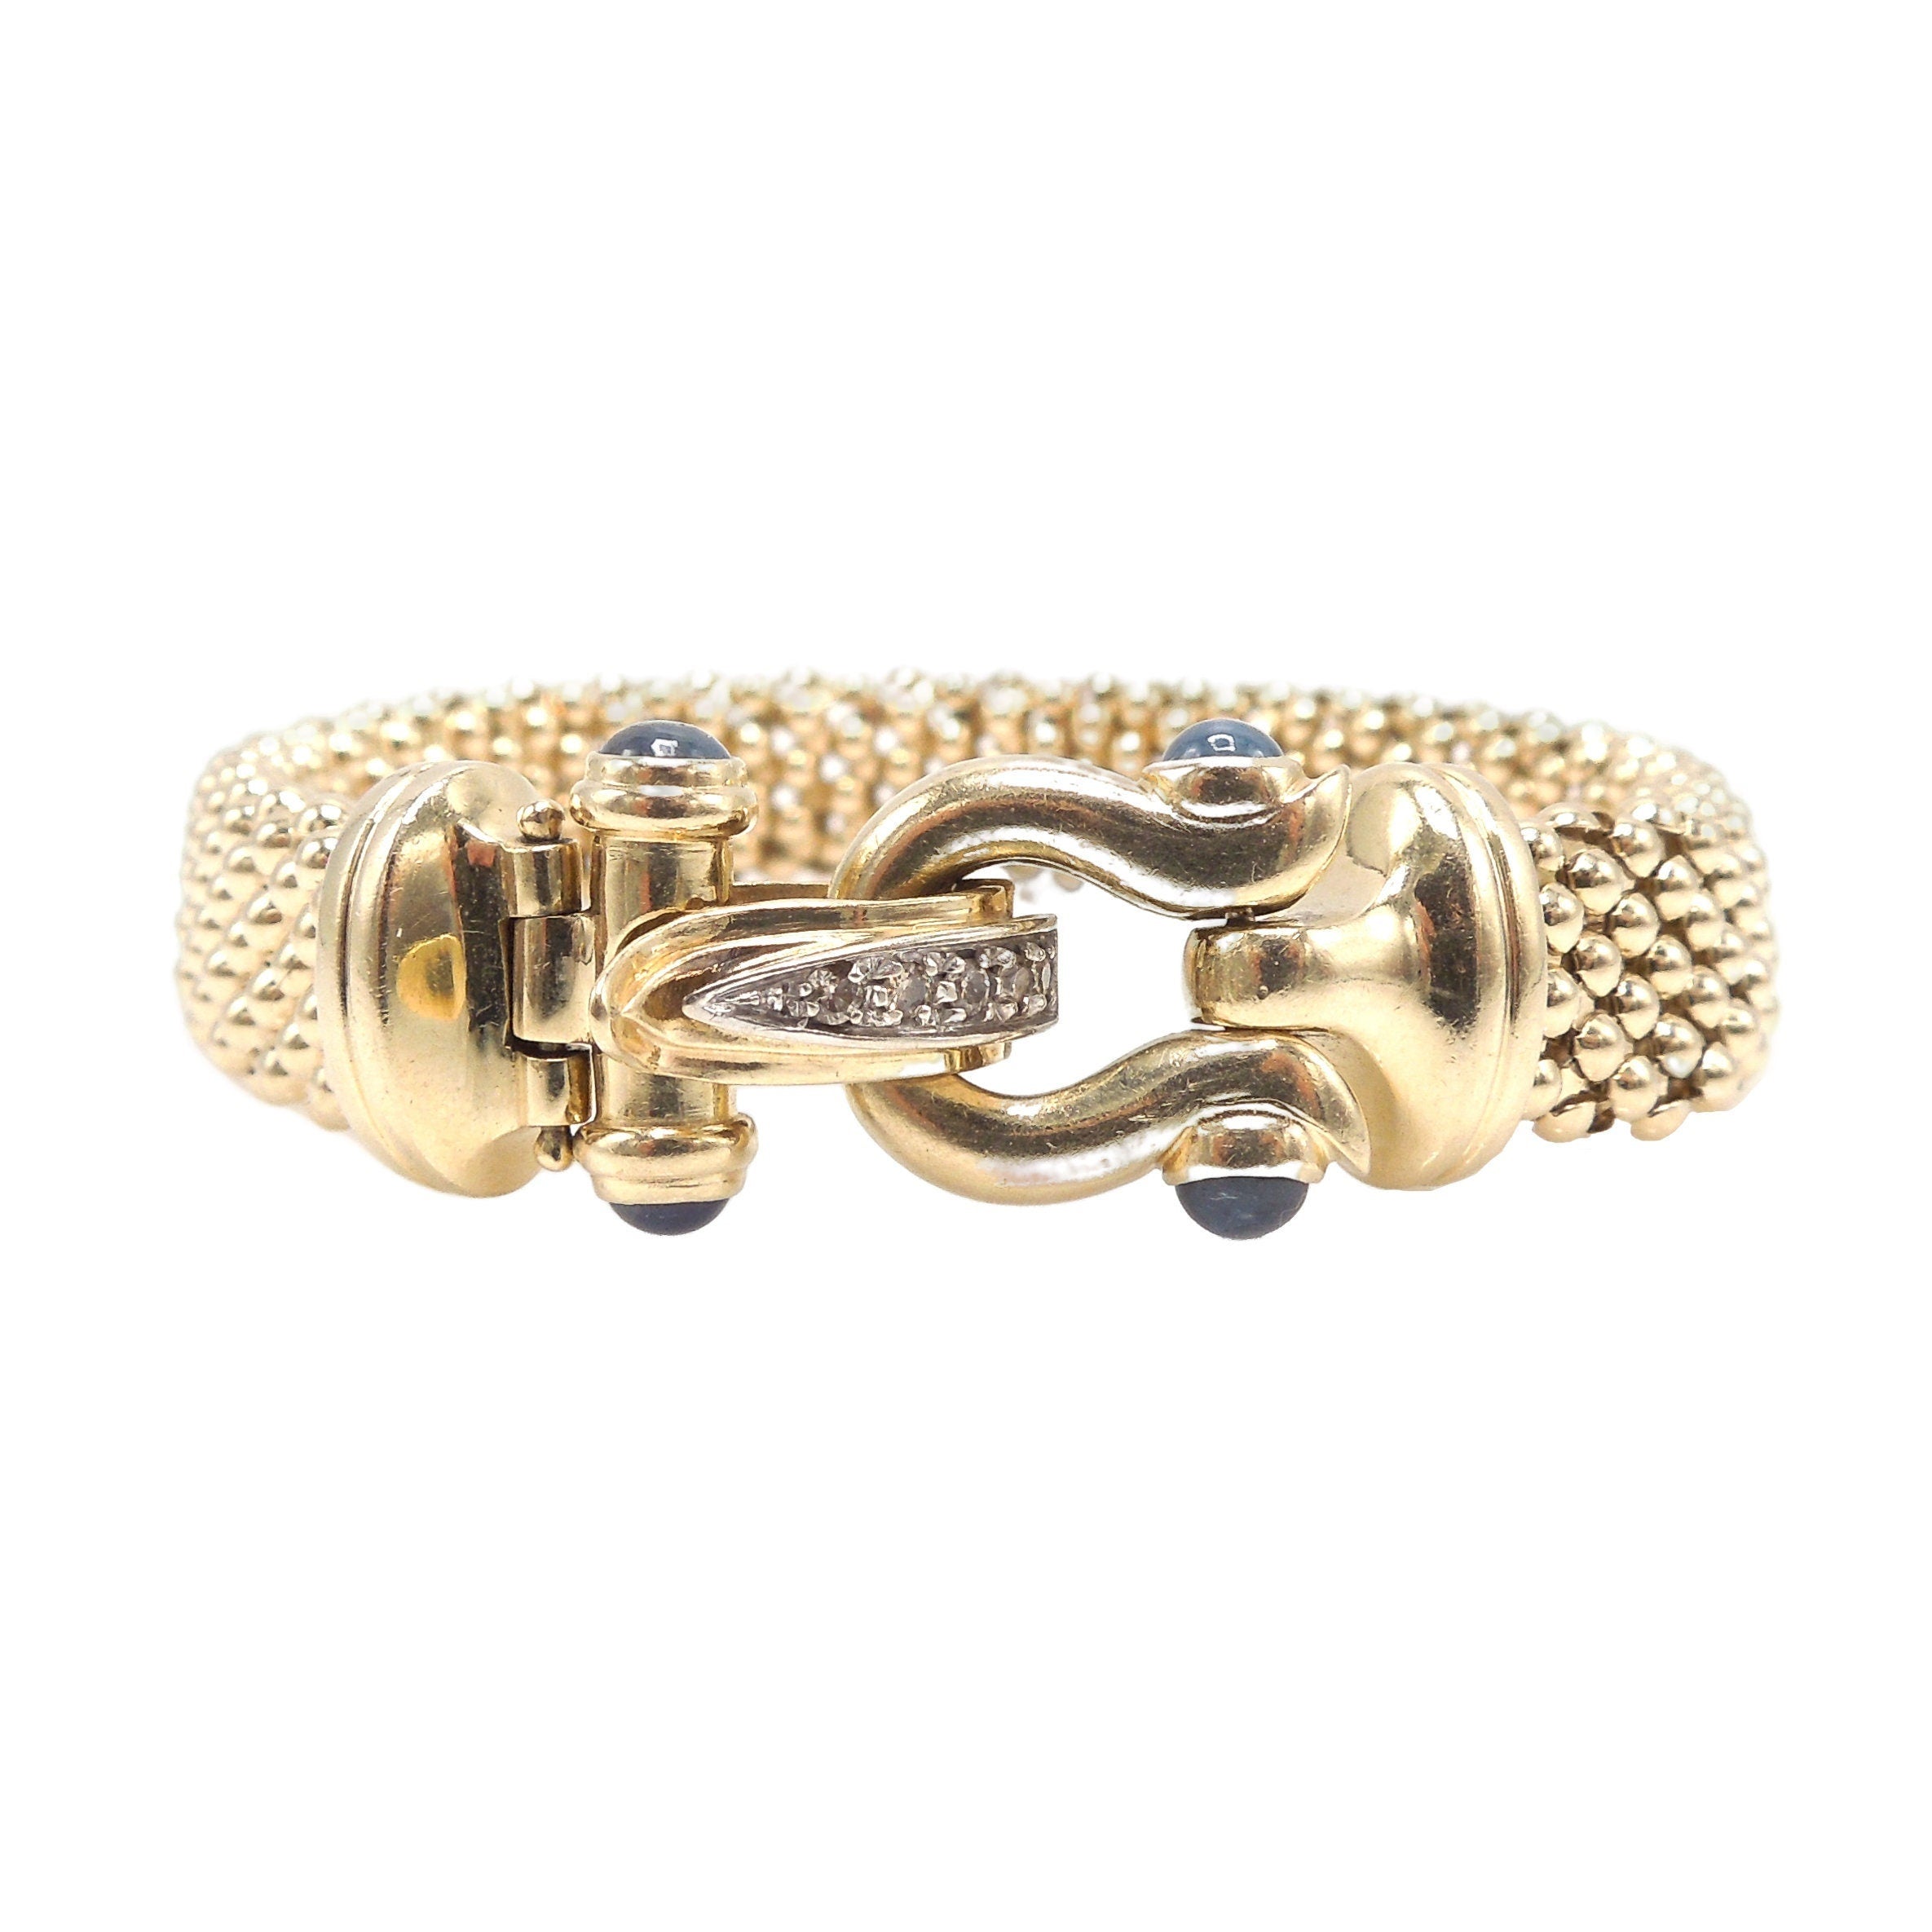 7.5" 14K Yellow Gold Textured Ball Bracelet with Diamond and Sapphire Foldover Box Clasp